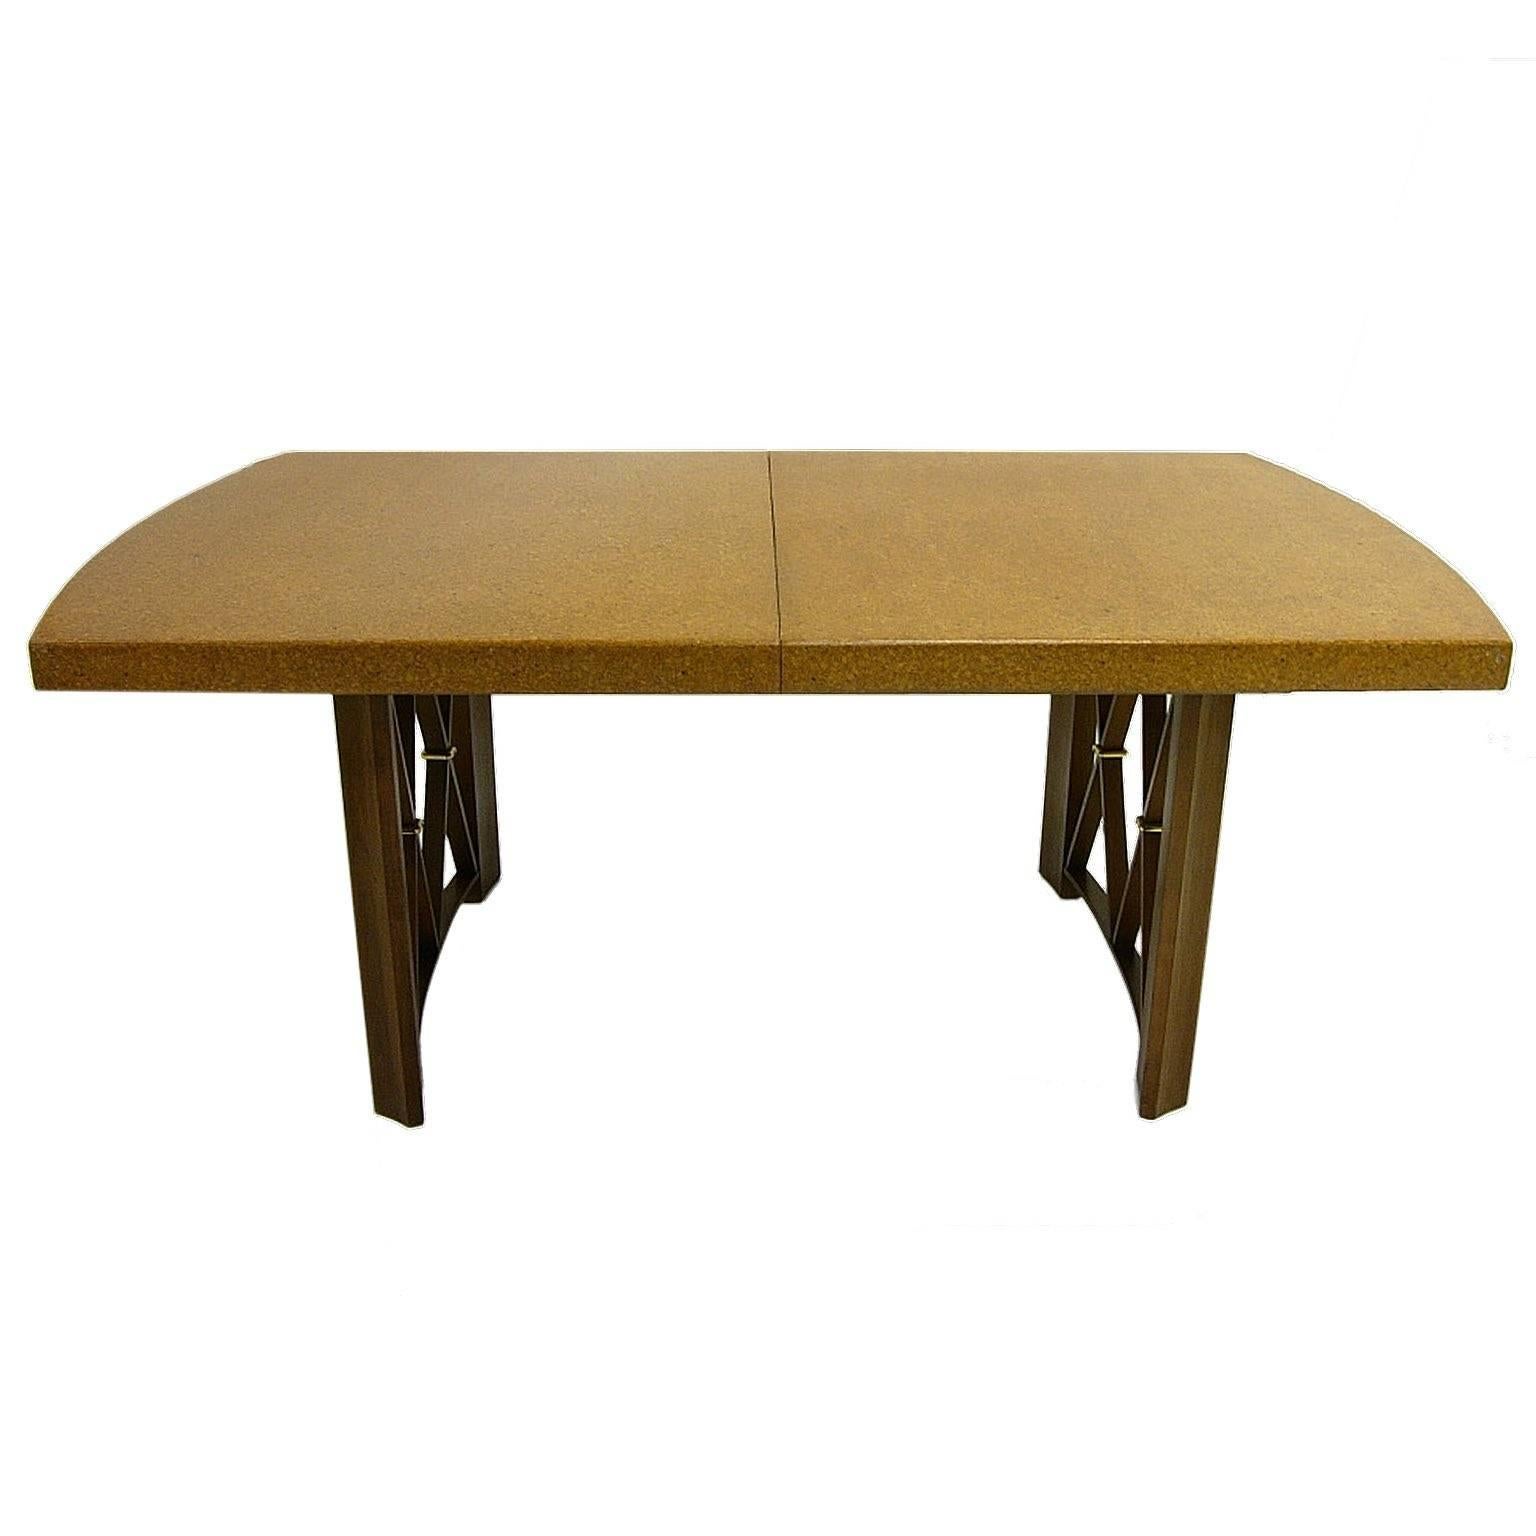 Mahogany Stunning Paul Frankl Cork Top Dining Table by Johnson Furniture Company